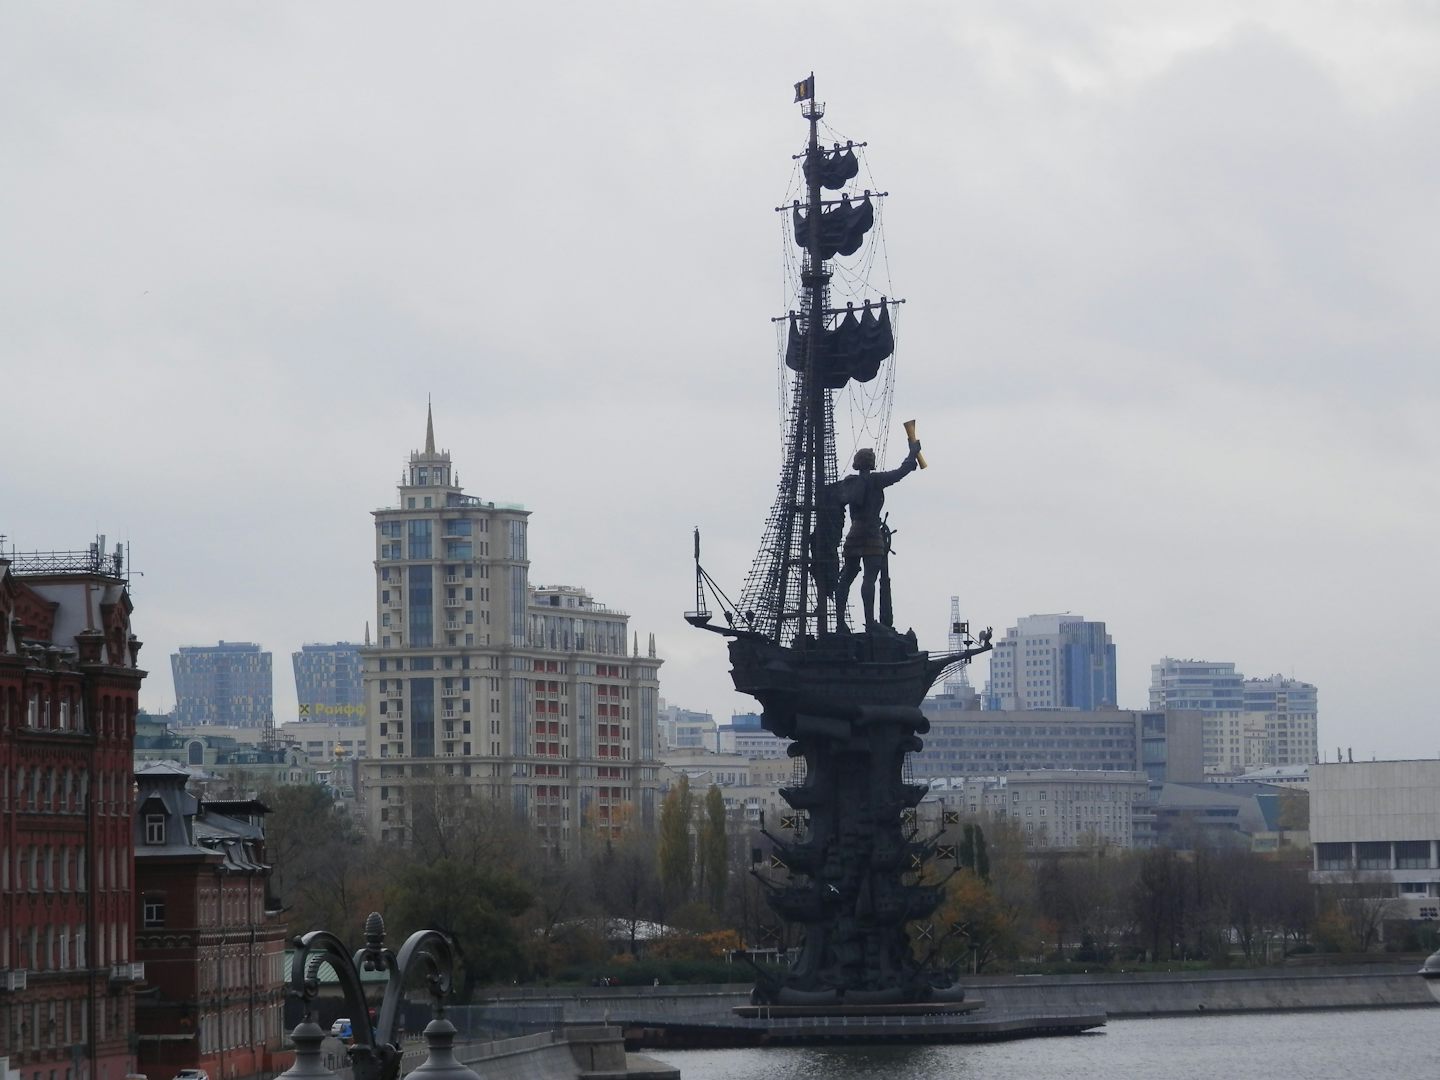 A Re-purposed giant sculpture (Moscow River) - It was originally supposed t